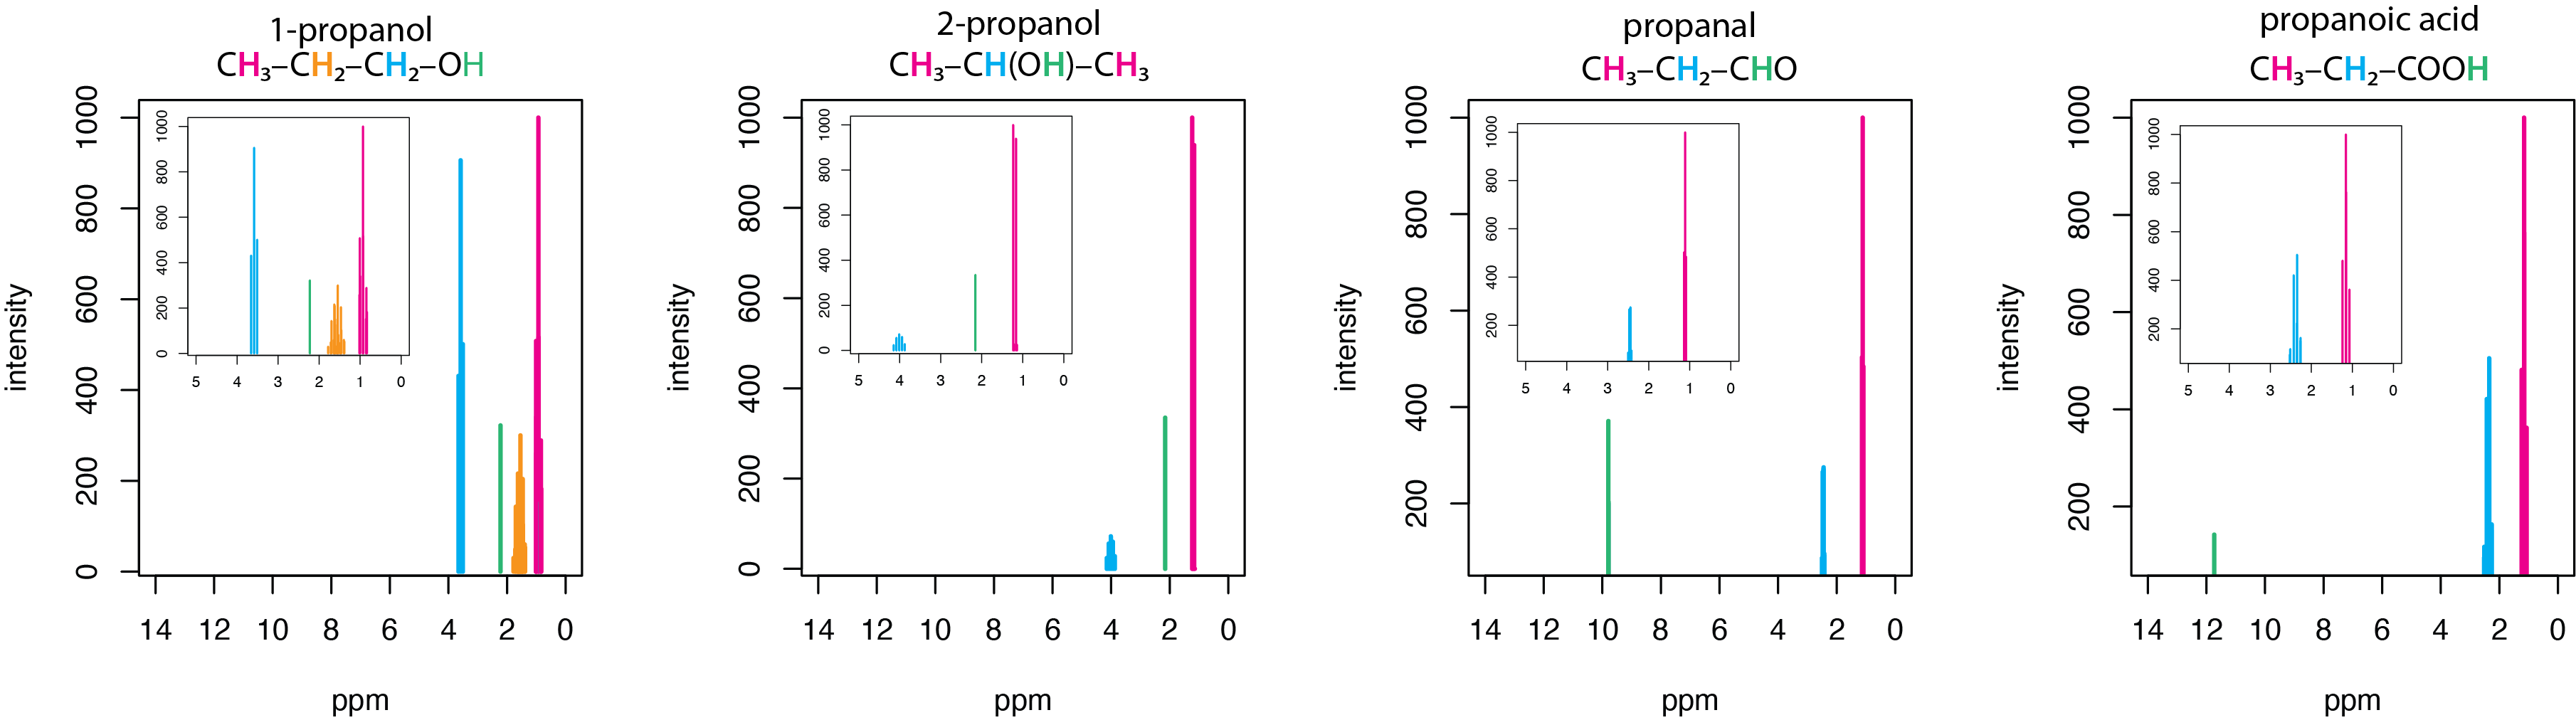 Proton NMR spectra for 1-propanol, 2-propanol, propanal, and propanoic acid.